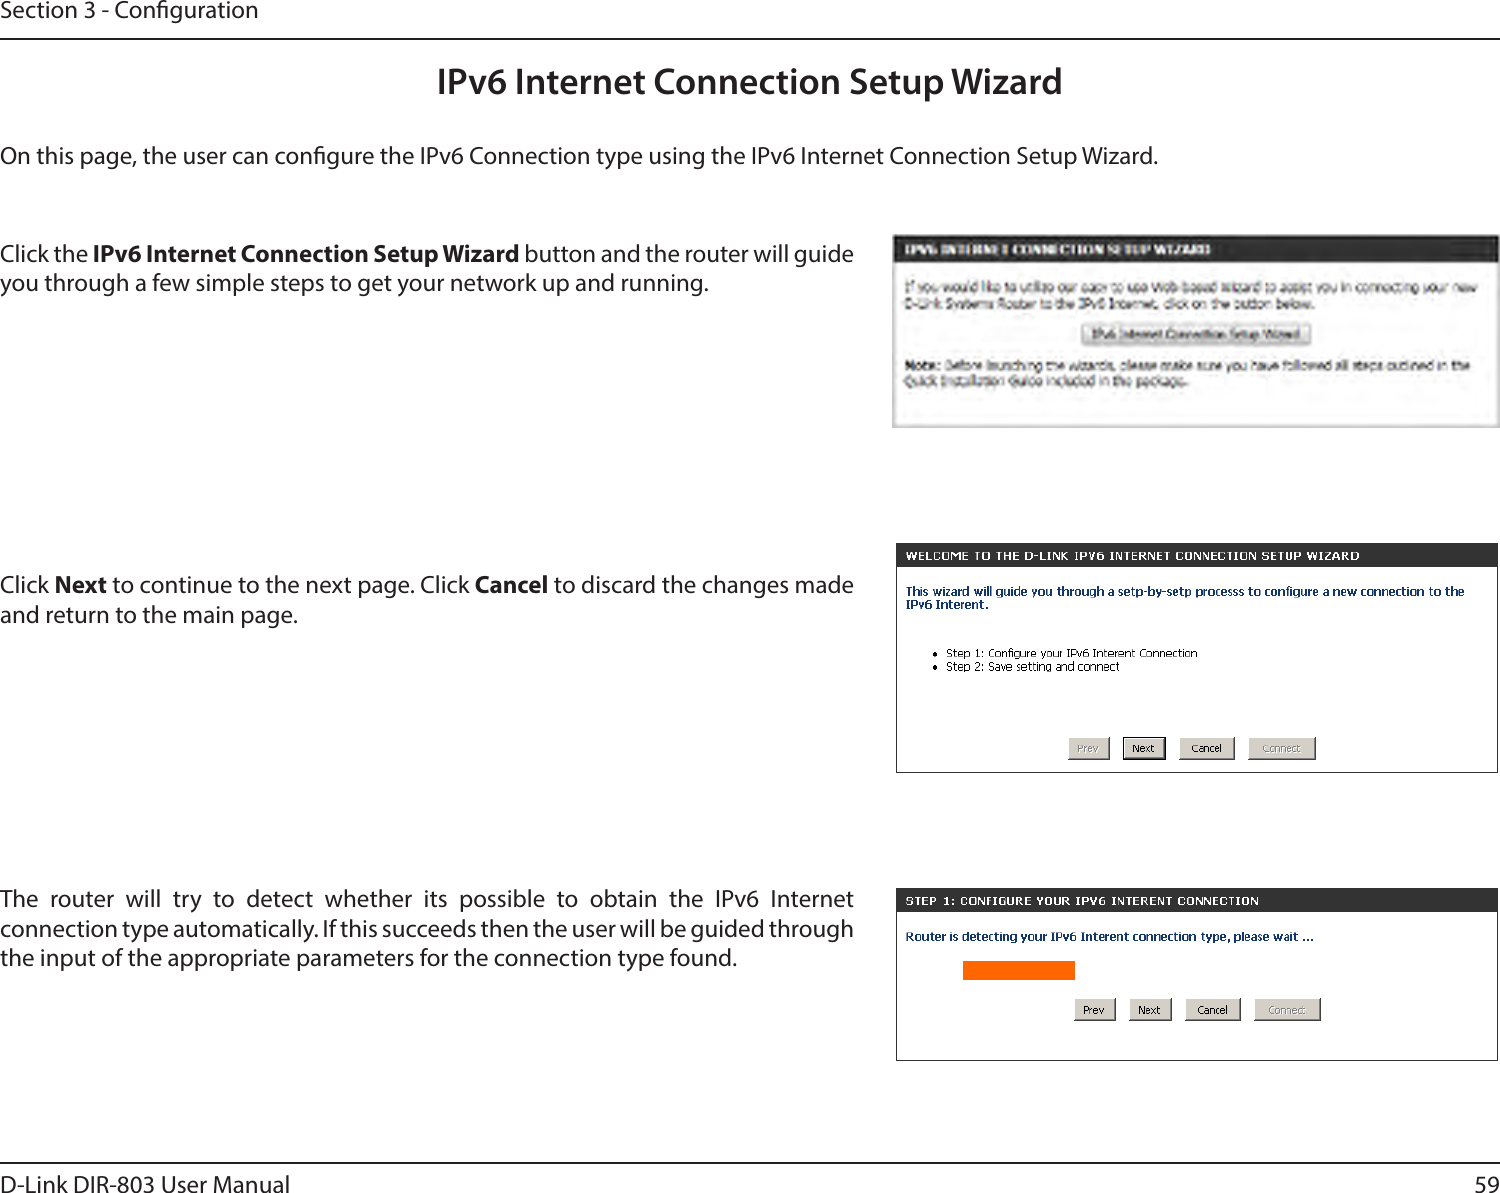 59D-Link DIR-803 User ManualSection 3 - CongurationIPv6 Internet Connection Setup WizardOn this page, the user can congure the IPv6 Connection type using the IPv6 Internet Connection Setup Wizard.Click the IPv6 Internet Connection Setup Wizard button and the router will guide you through a few simple steps to get your network up and running.Click Next to continue to the next page. Click Cancel to discard the changes made and return to the main page.The router will try to detect whether its possible to obtain the IPv6 Internet connection type automatically. If this succeeds then the user will be guided through the input of the appropriate parameters for the connection type found.